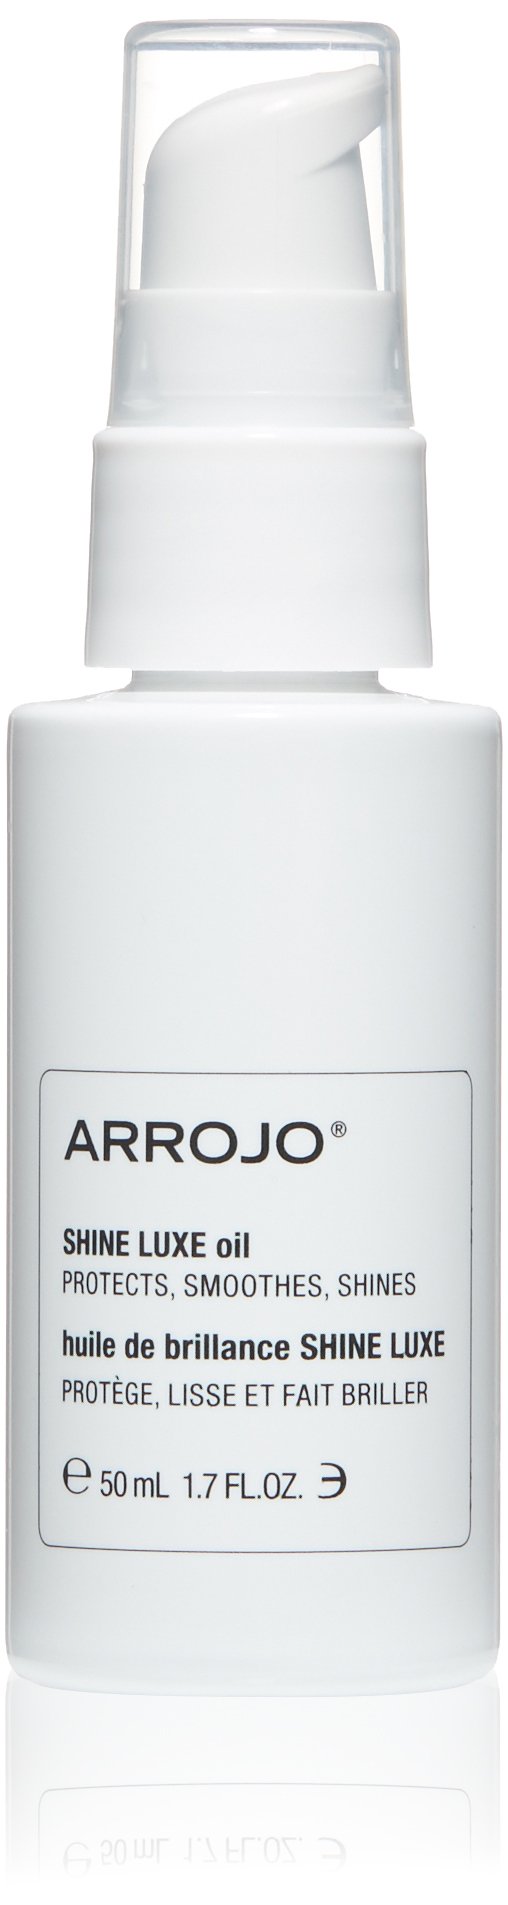 ARROJO Shine Luxe Hair Oil – Versatile Oil For Hair To Add Control, Shine - Luster – Oil Heat Protectant For Hair – Anti Frizz Hair Products For Smooth Hair – Hair Oils For All Hair Types (1.7 Oz)